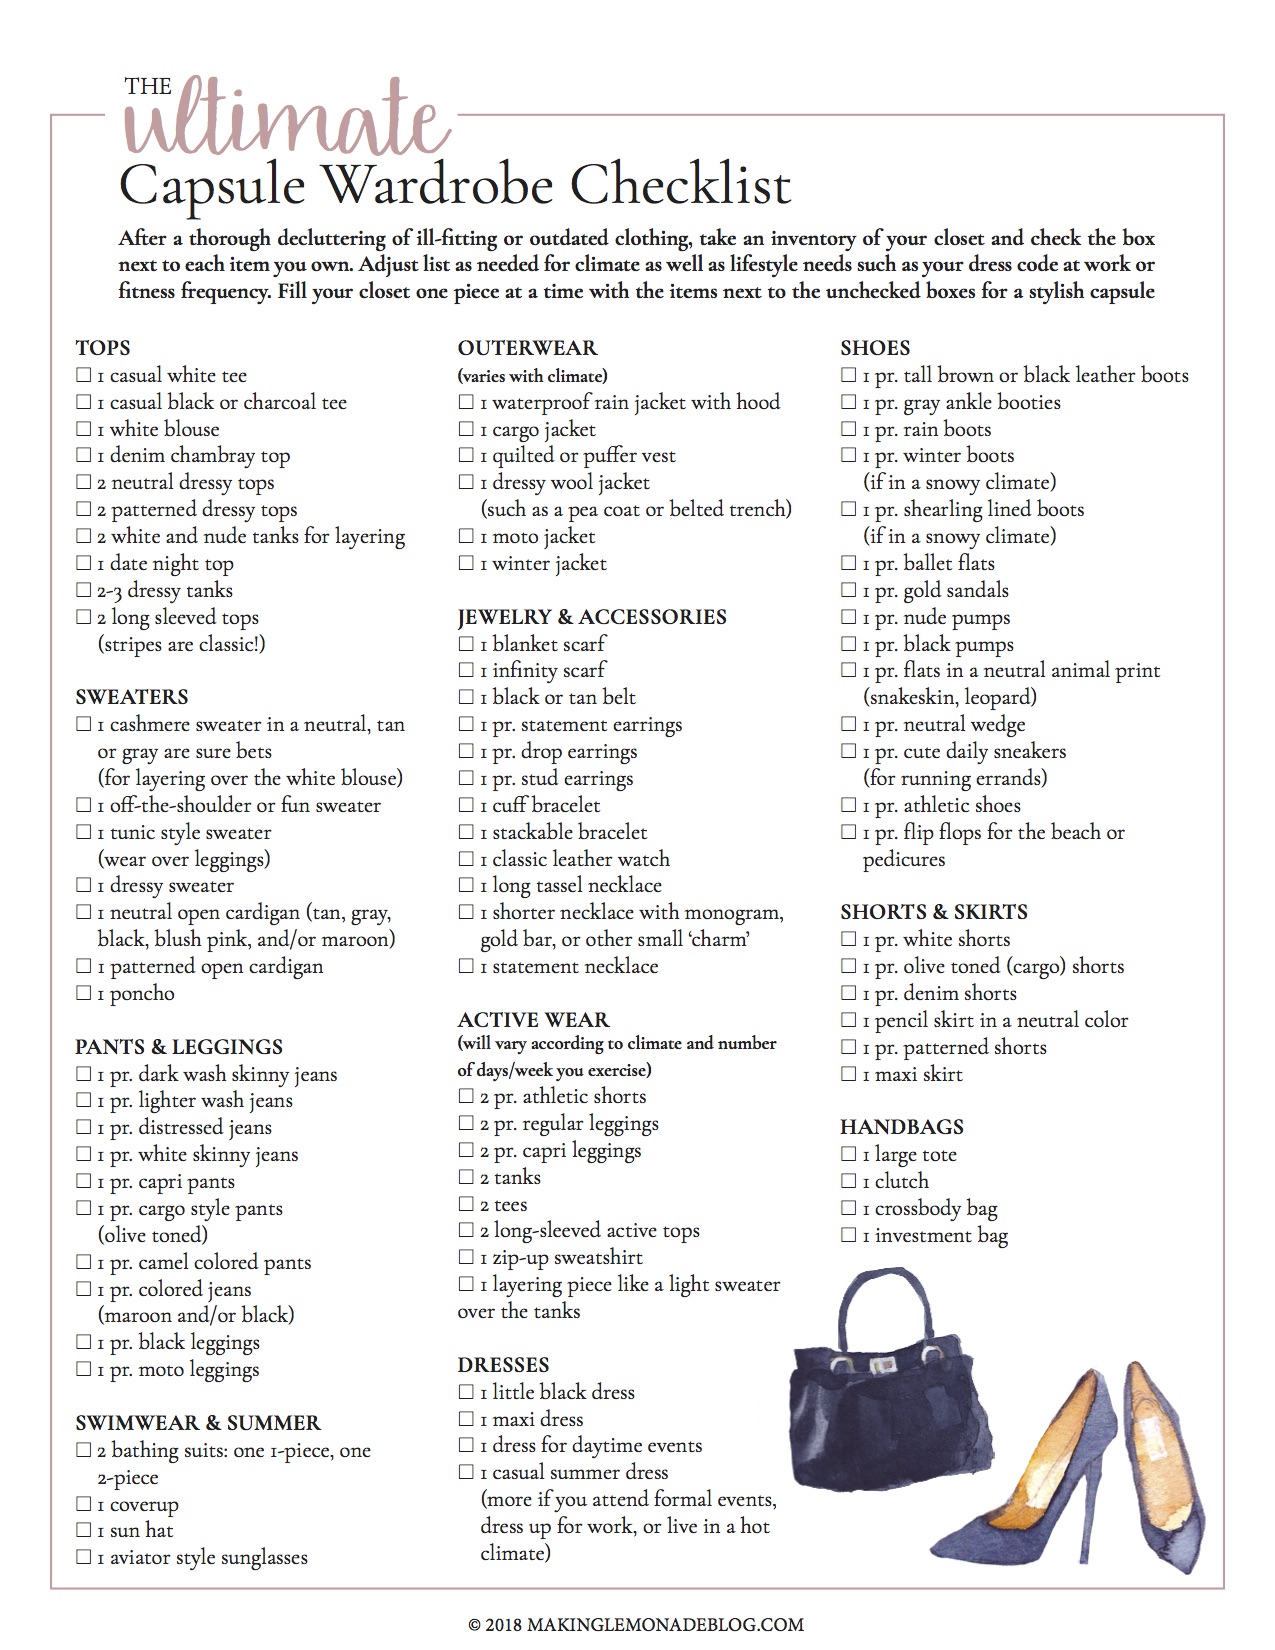 This free printable ultimate capsule wardrobe checklist is exactly what I need to put together a classic and stylish closet full of clothing I love to wear!